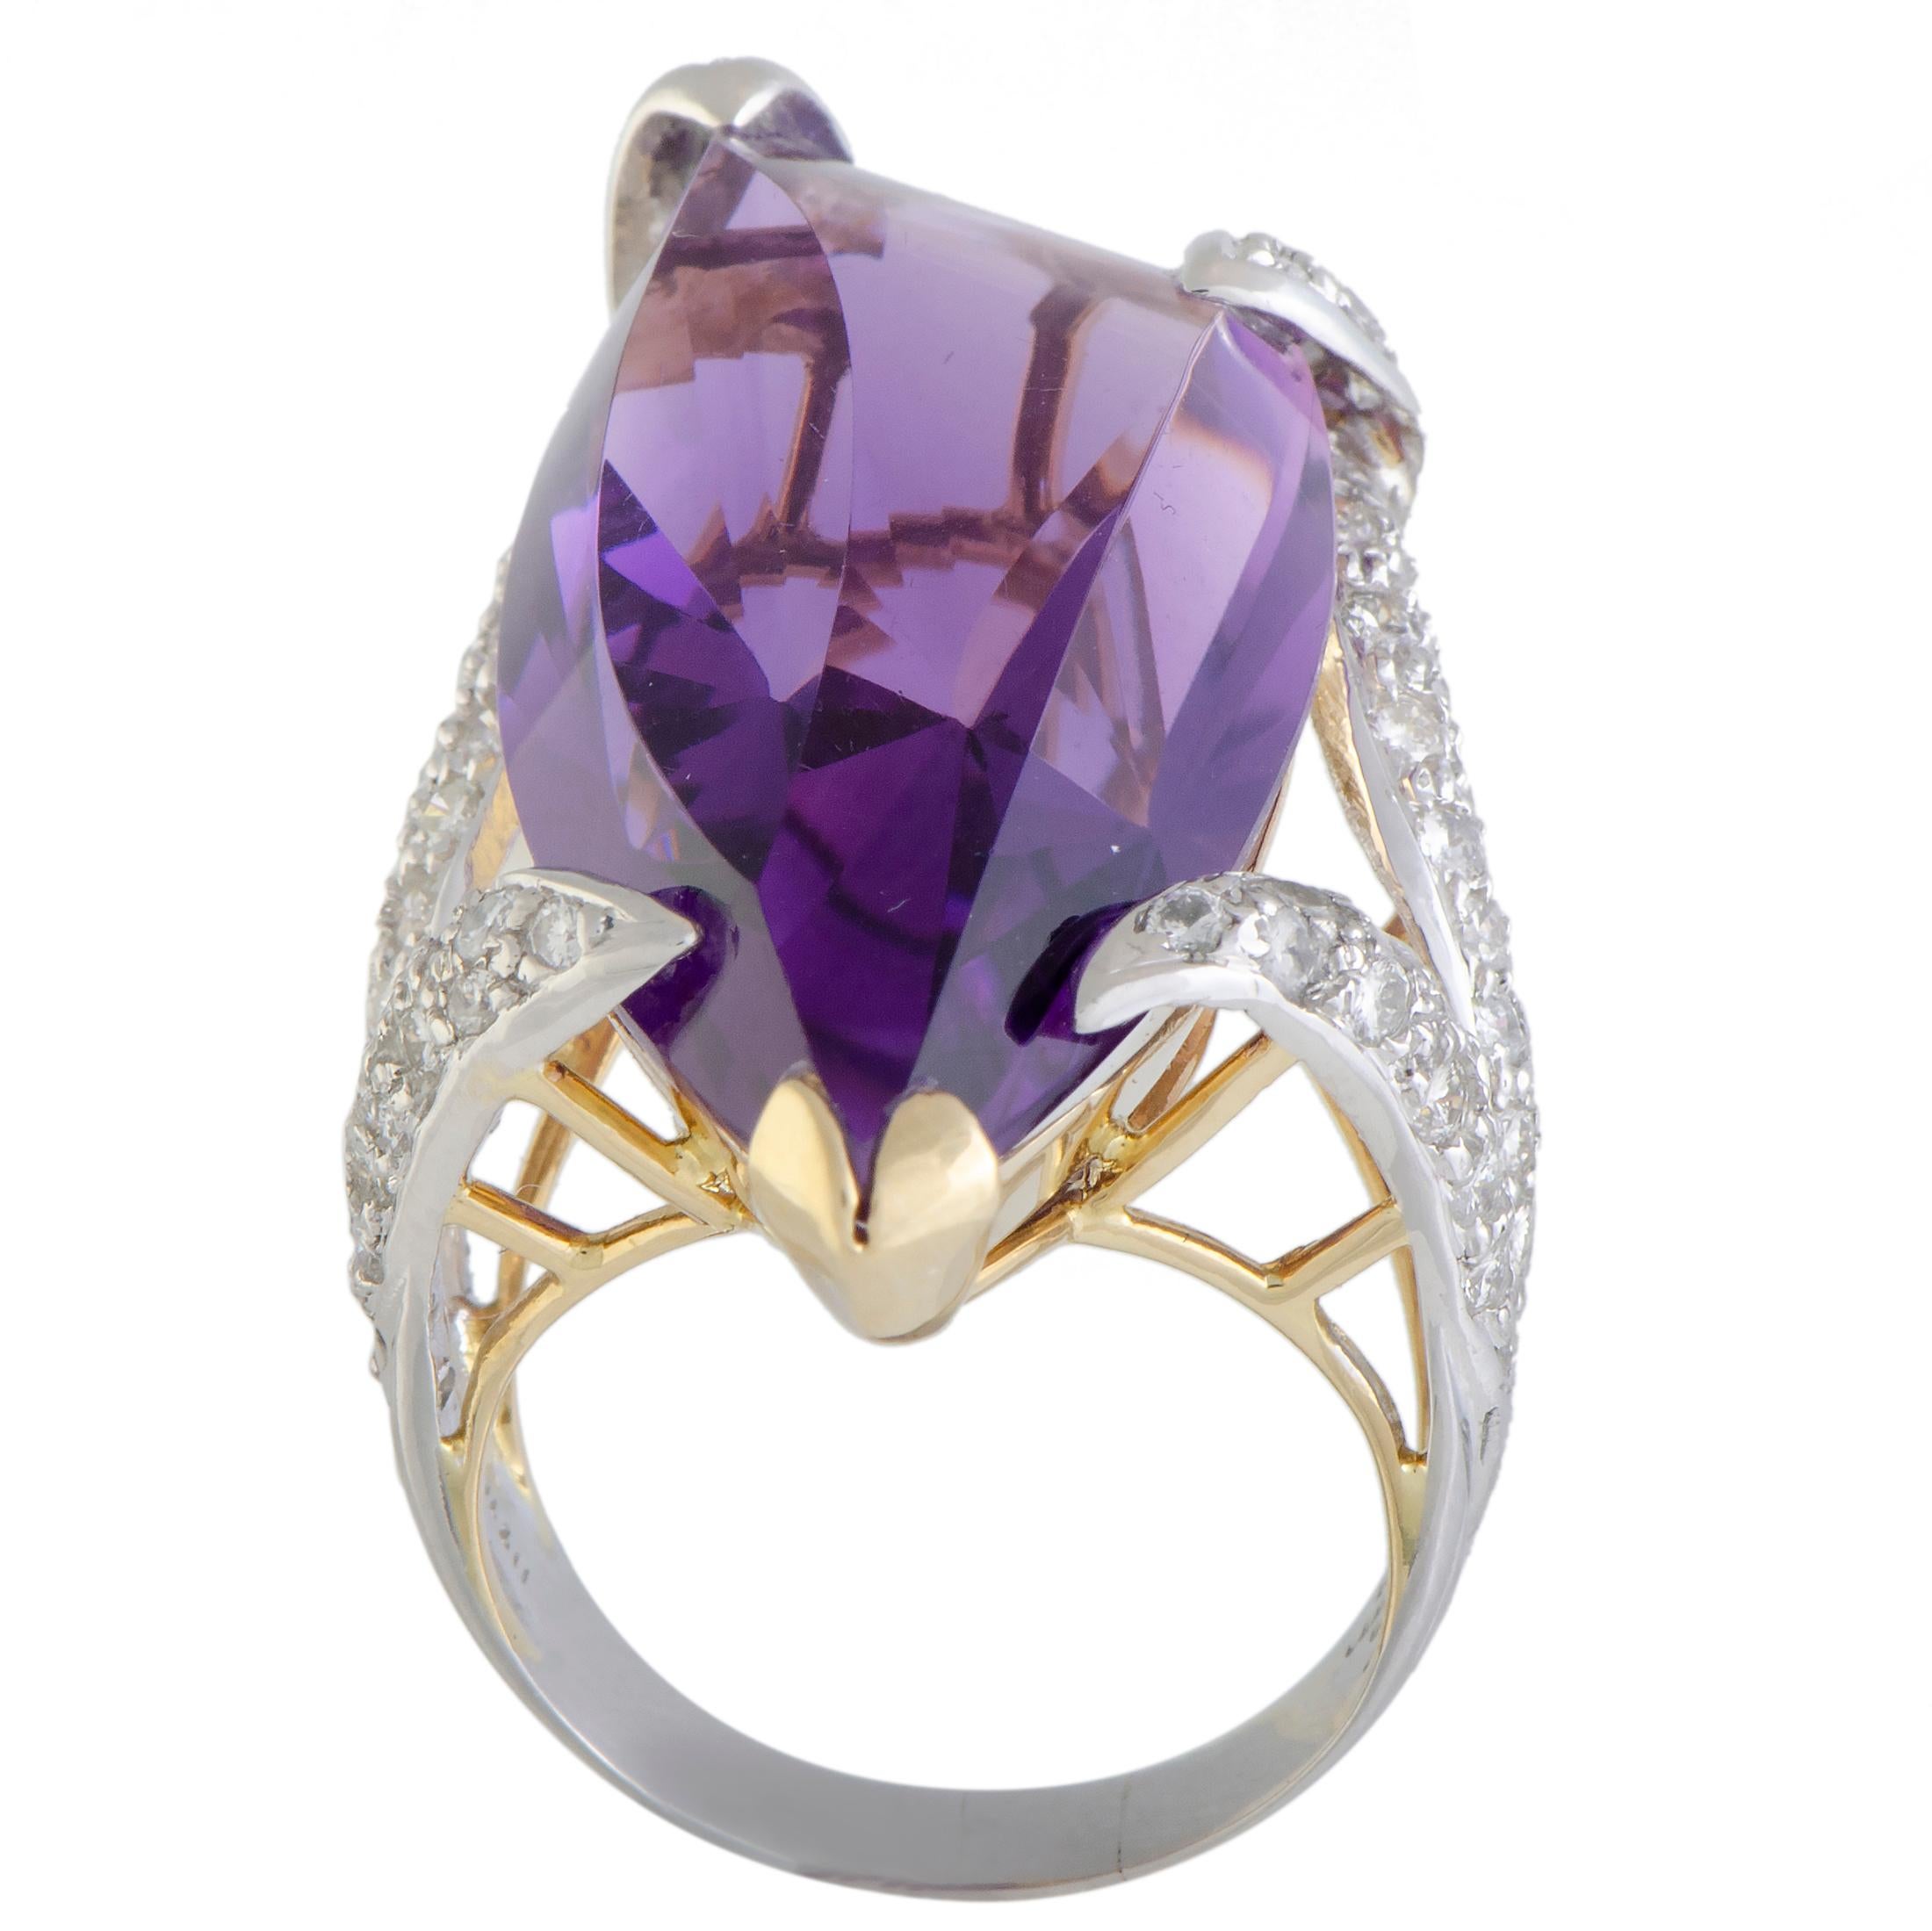 Bringing a delightful artistic approach to jewelry design, this extraordinary ring compels with its offbeat fashionable style and attractive gemstone décor. The ring is made of platinum and 18K yellow gold and it is set with a total of 1.16 carats